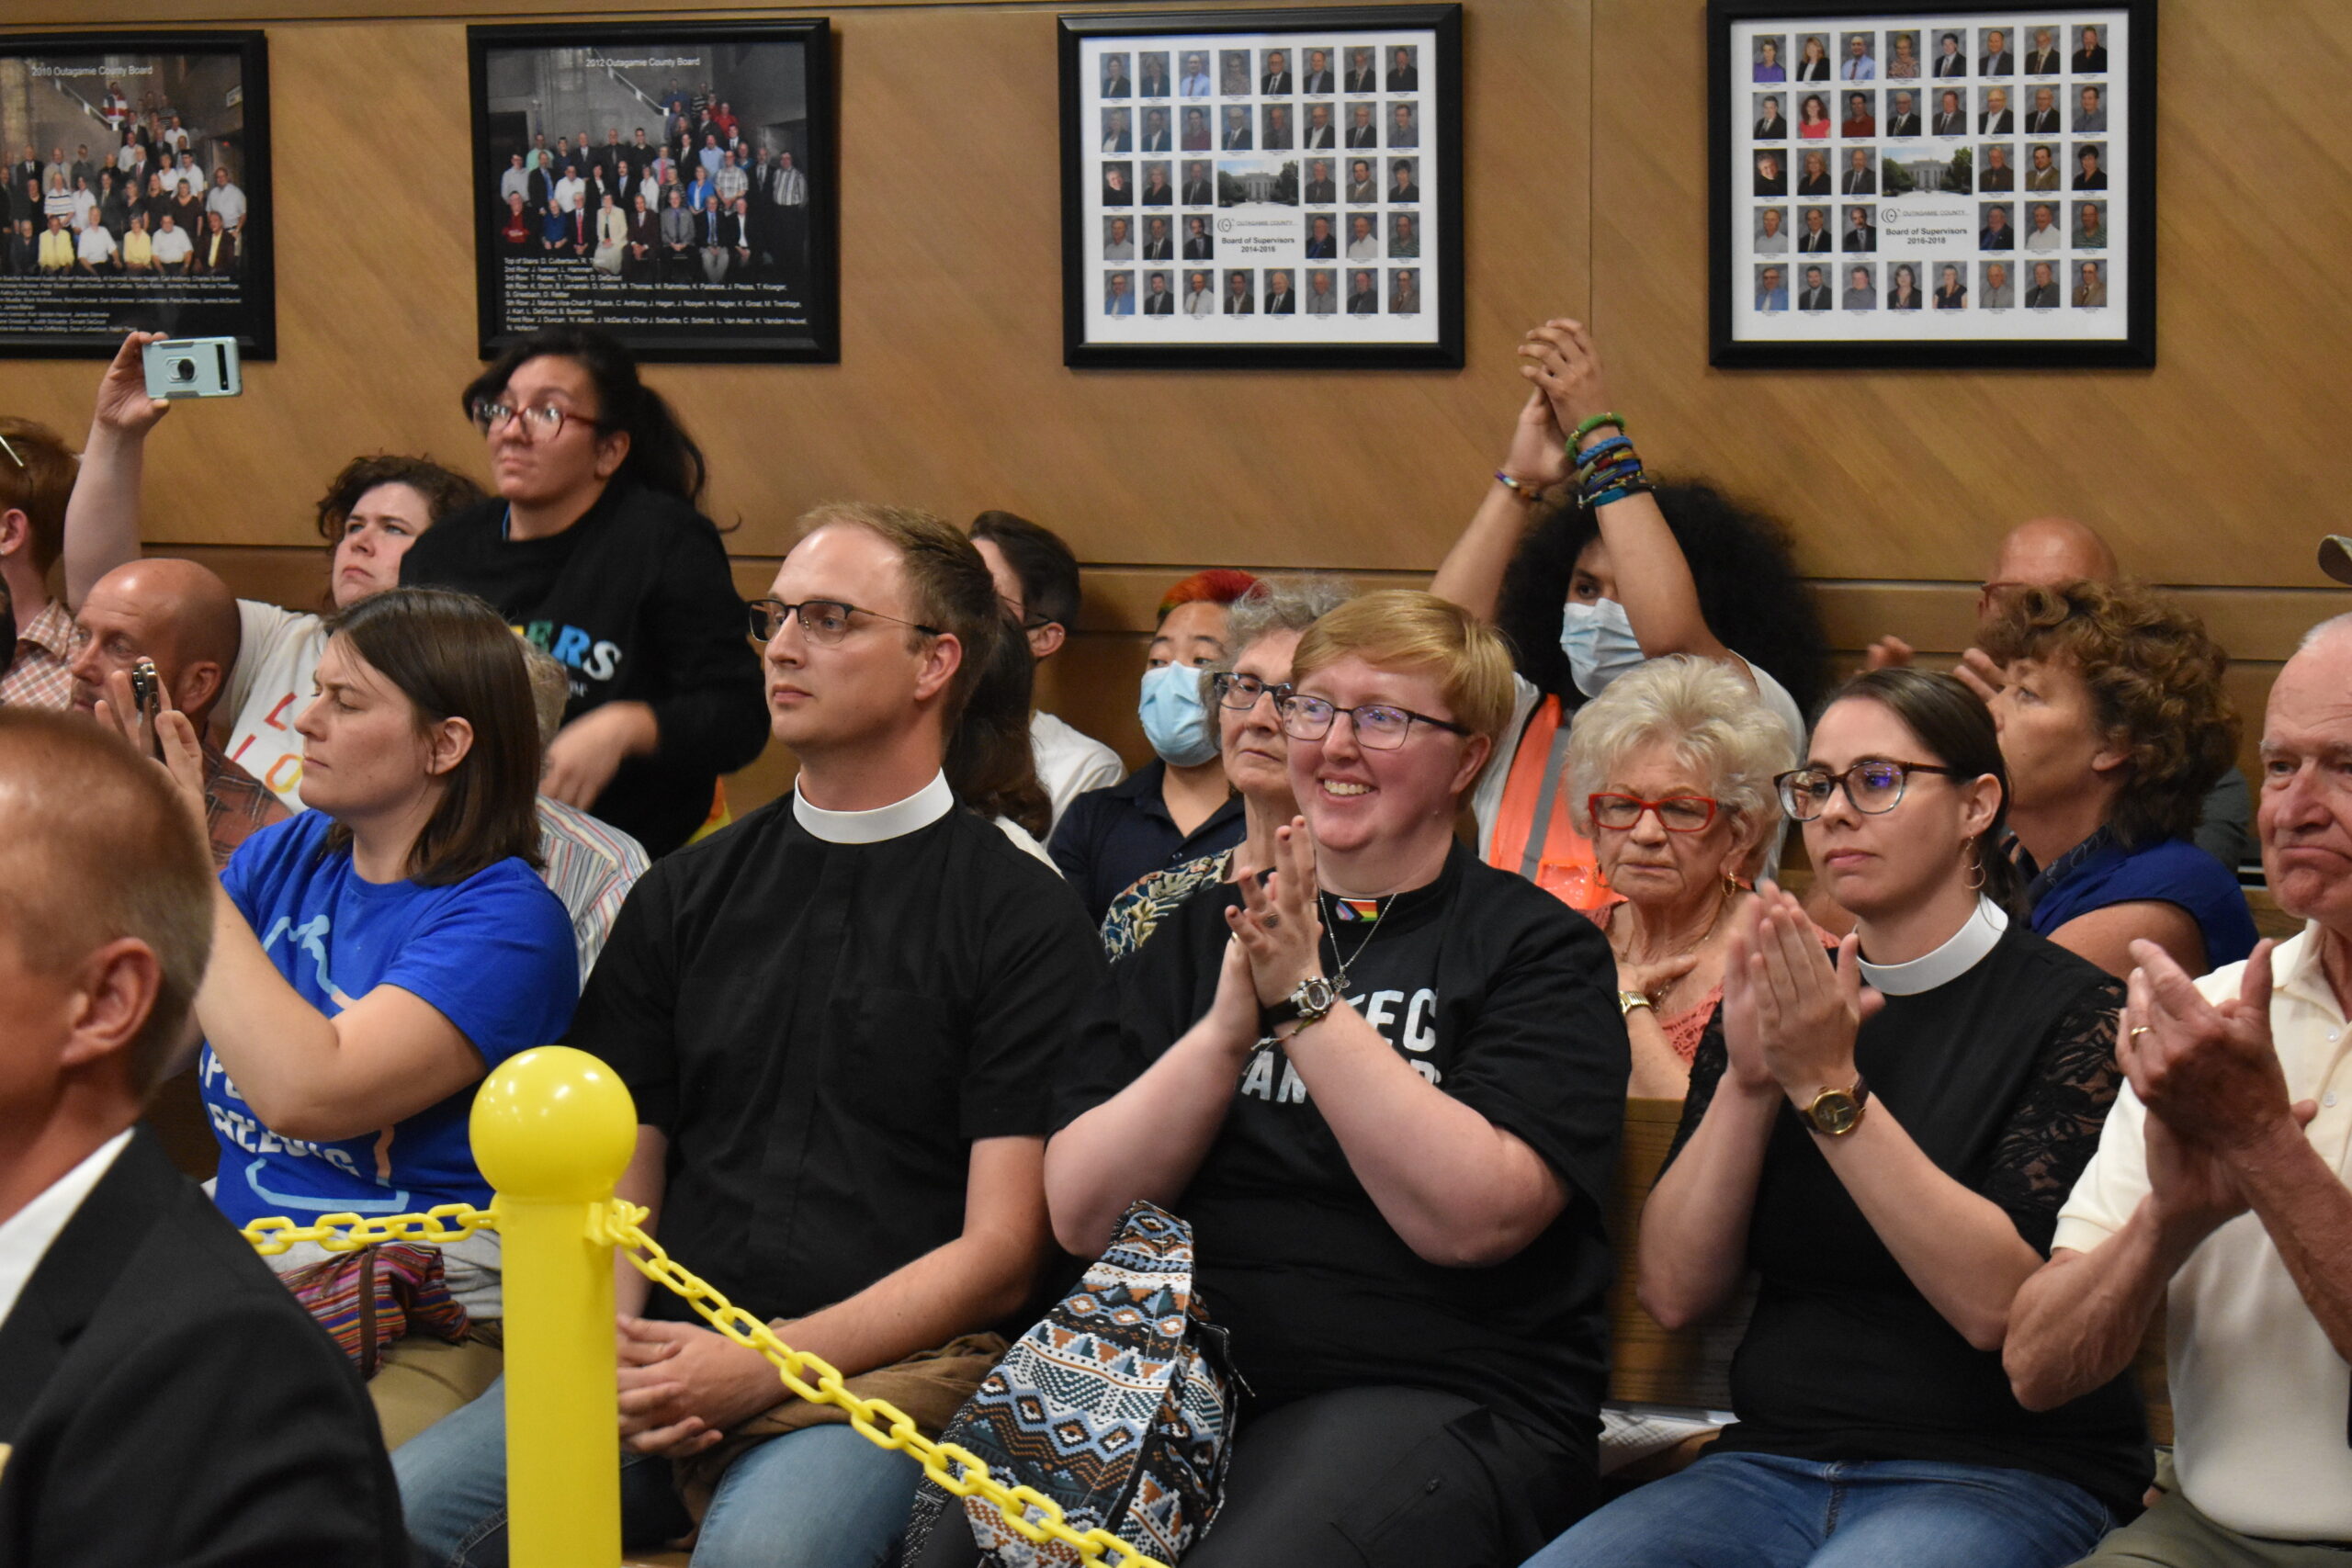 Trans-rights activists in the audience applaud the Outagamie County Board for voting to censure Supervisor Tim Hermes